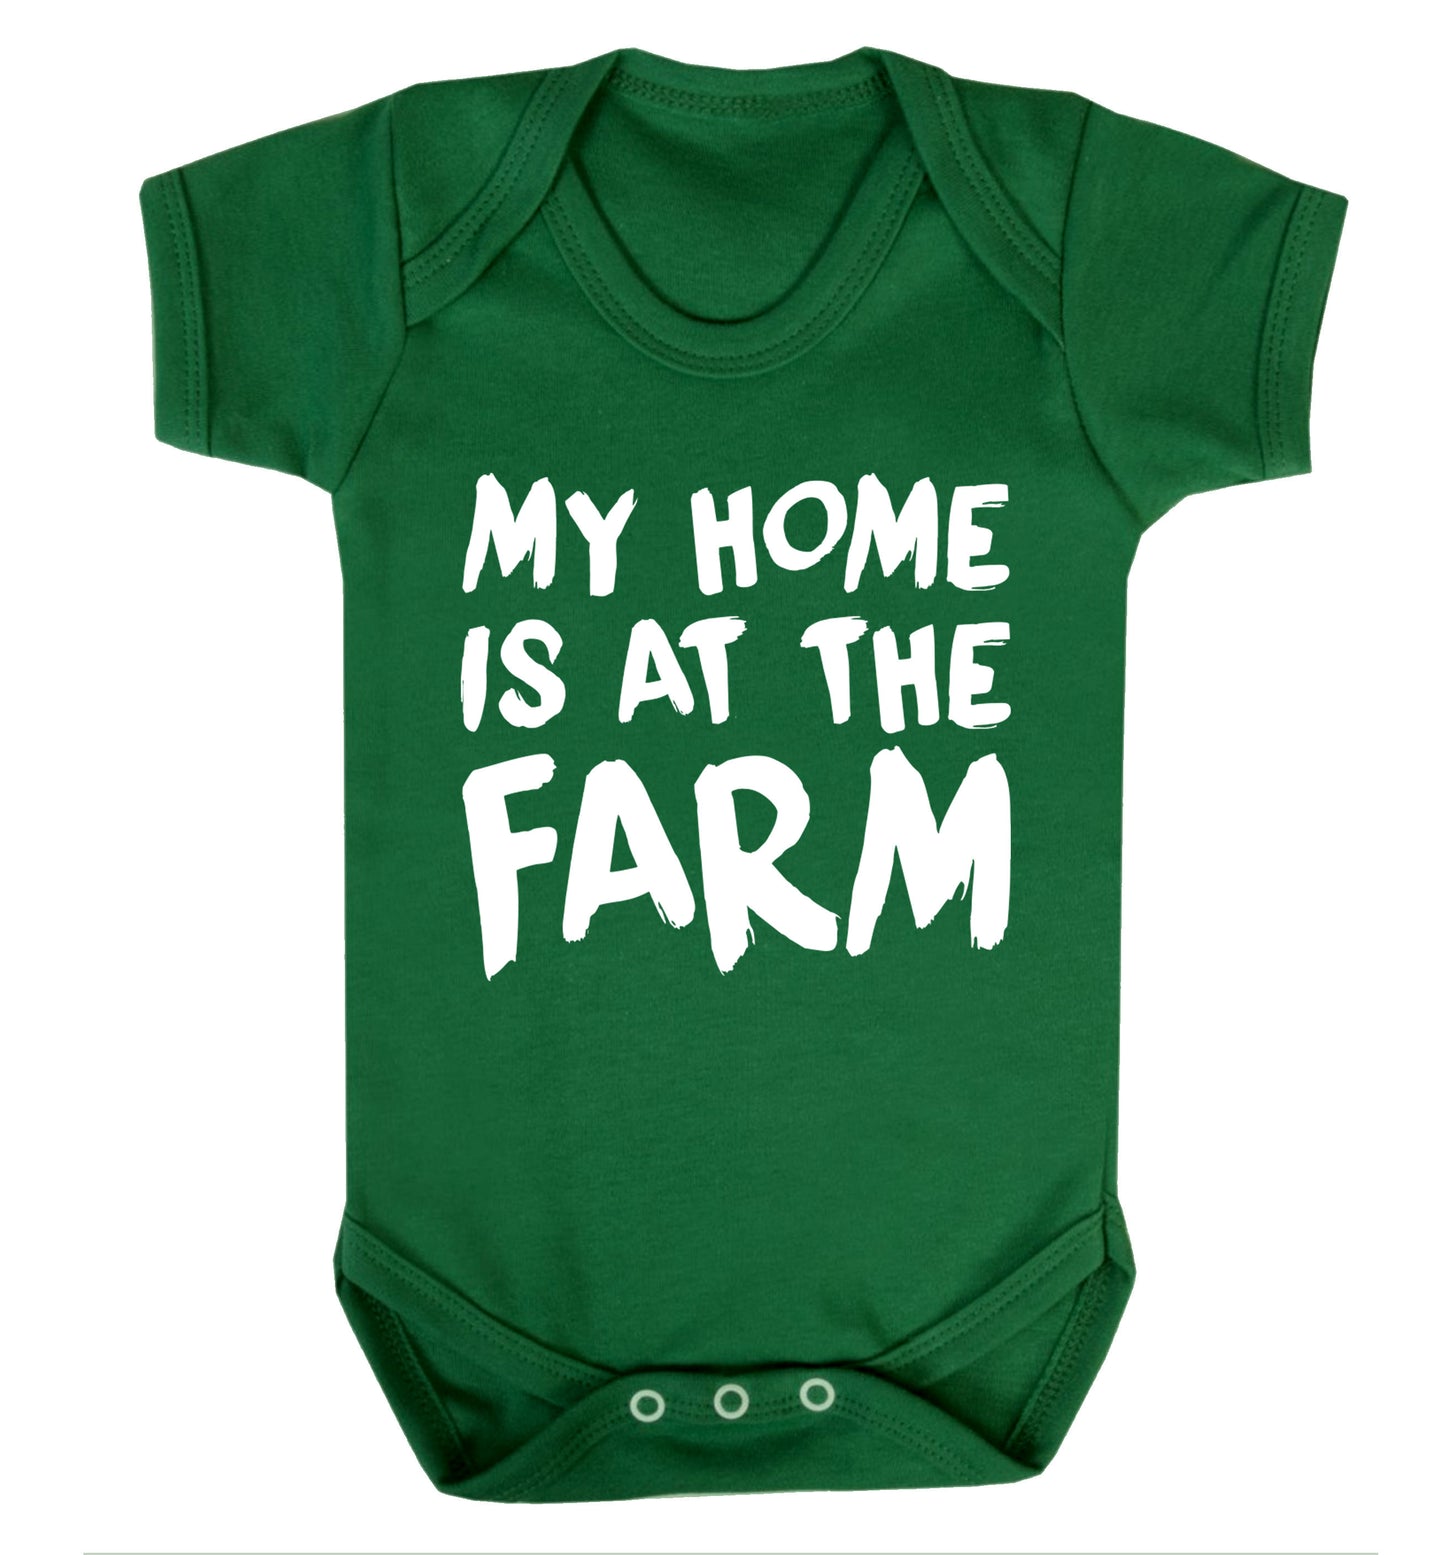 My home is at the farm Baby Vest green 18-24 months